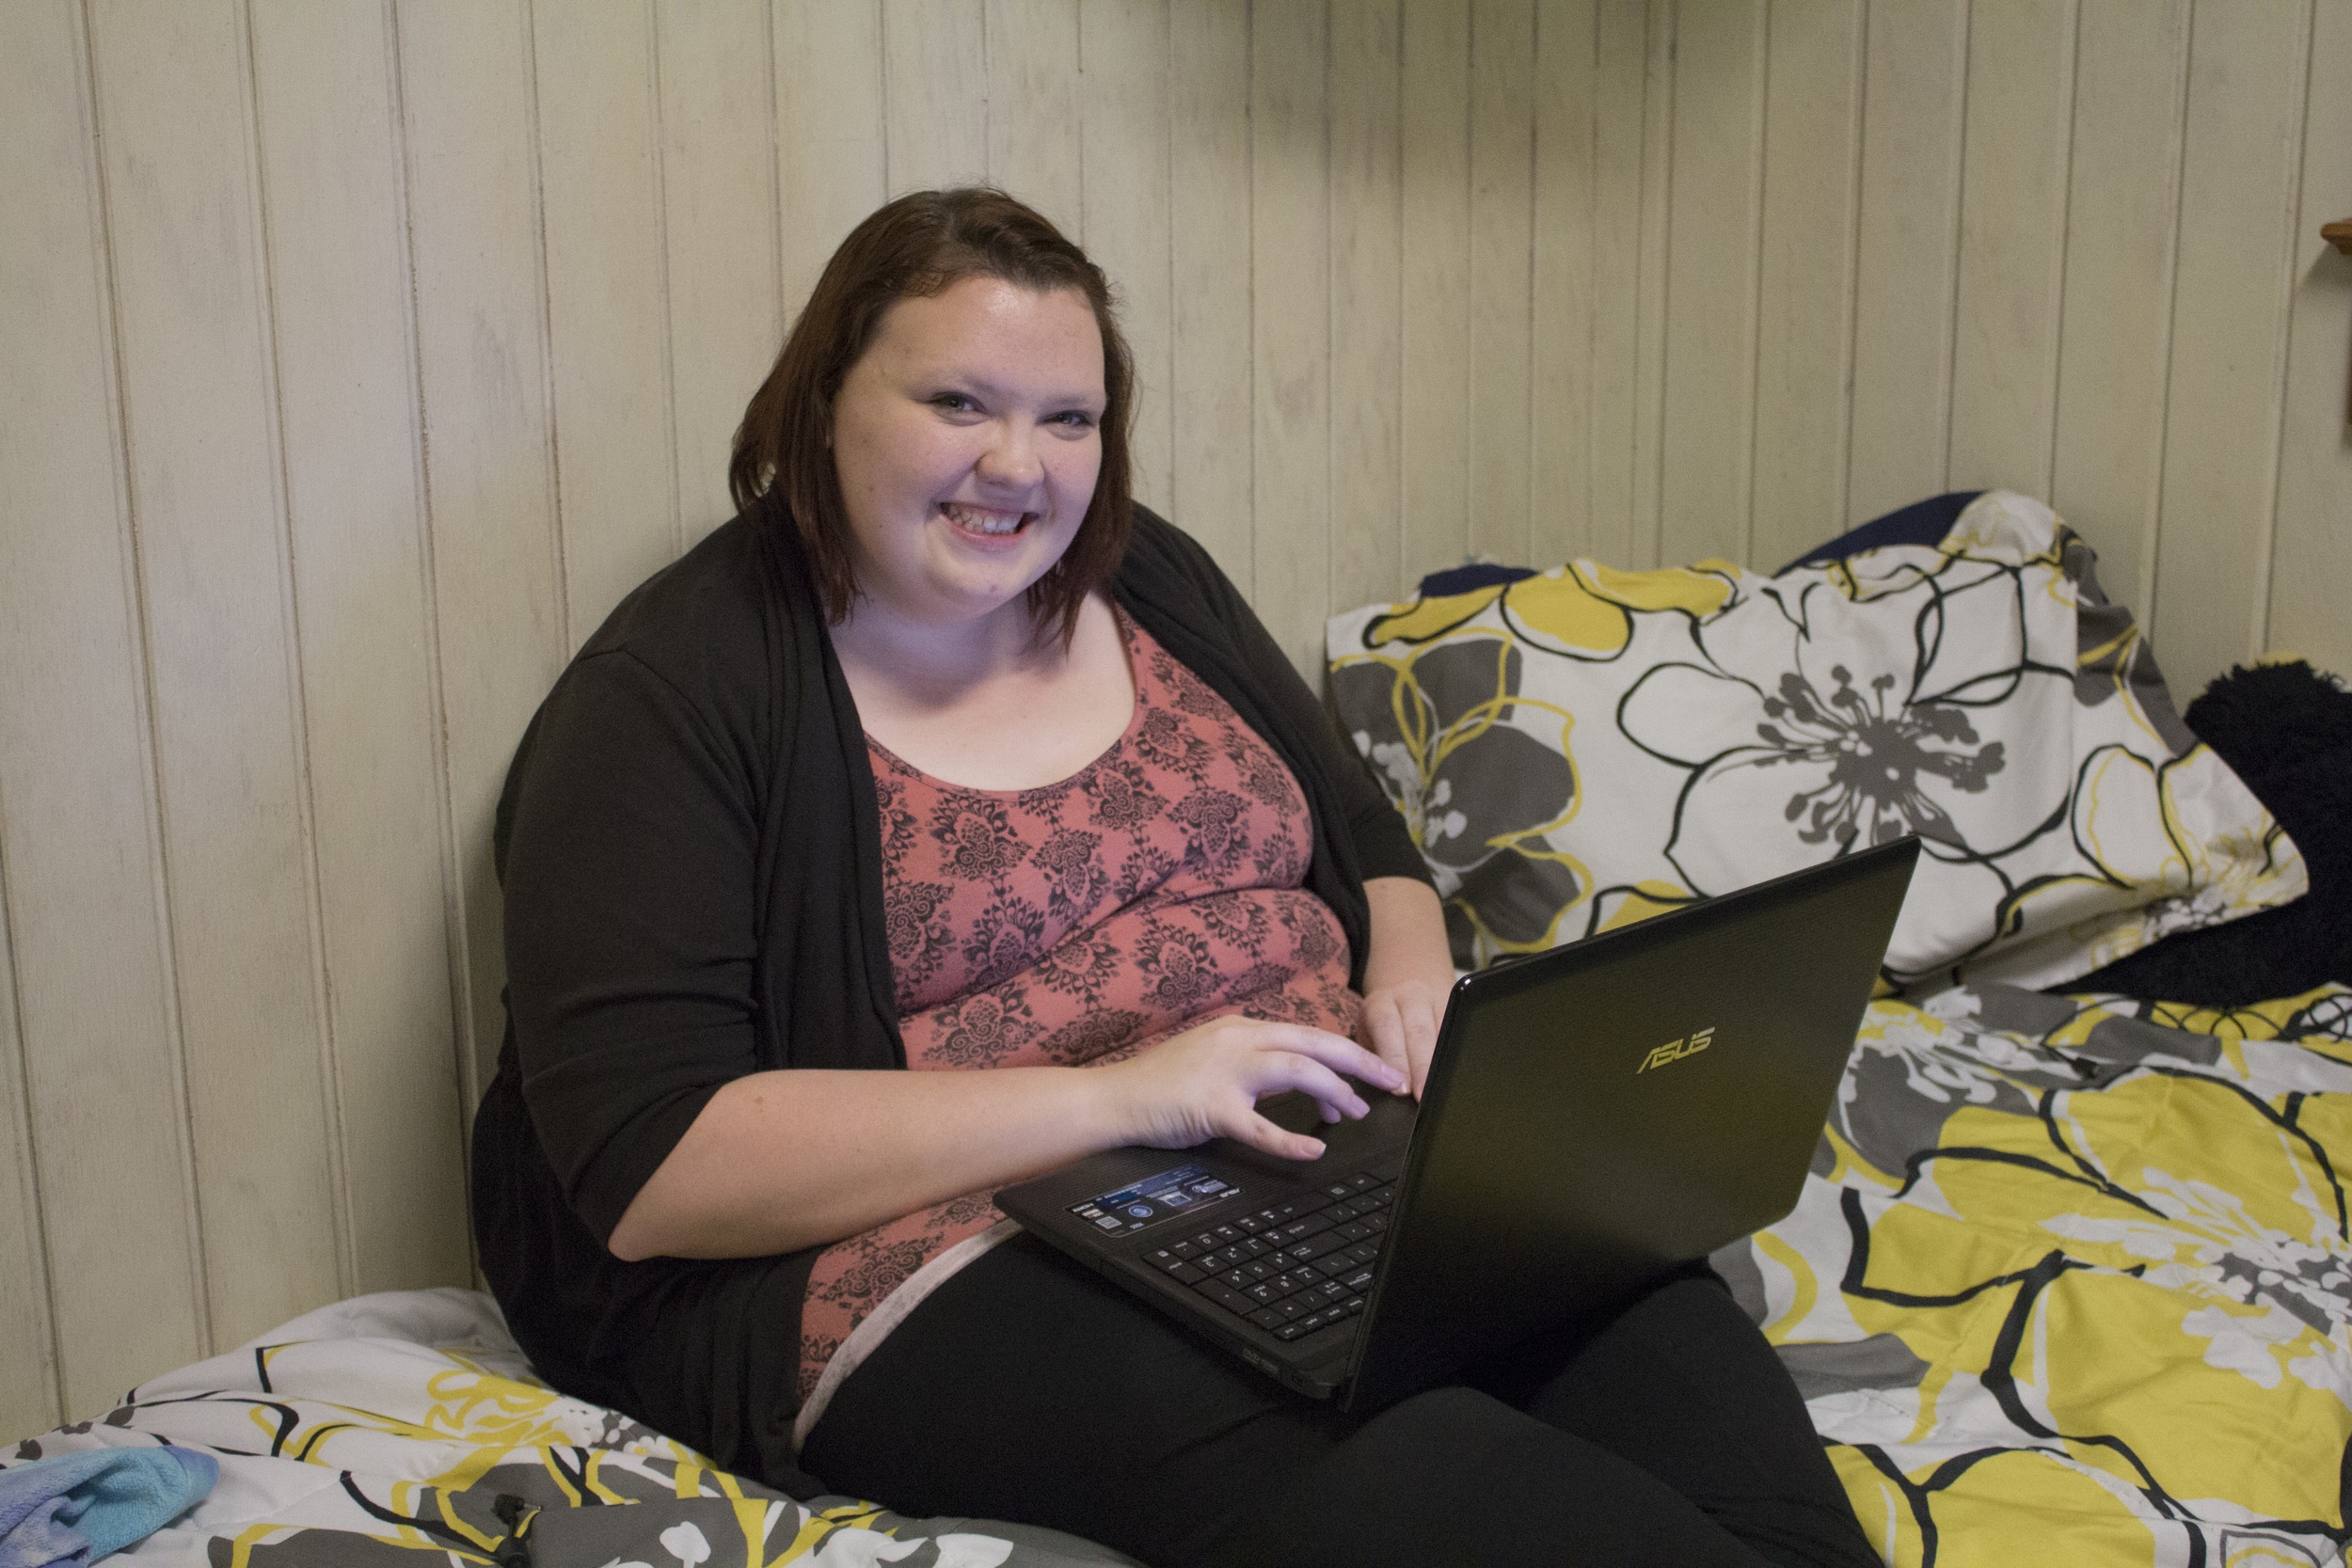  Some do not have the ability to&nbsp;have&nbsp;their boyfriend&nbsp;visit them during open dorms, so junior Jessica Younger makes the most of skype to be able to chat with her significant other during this eventful evening.&nbsp;&nbsp; 